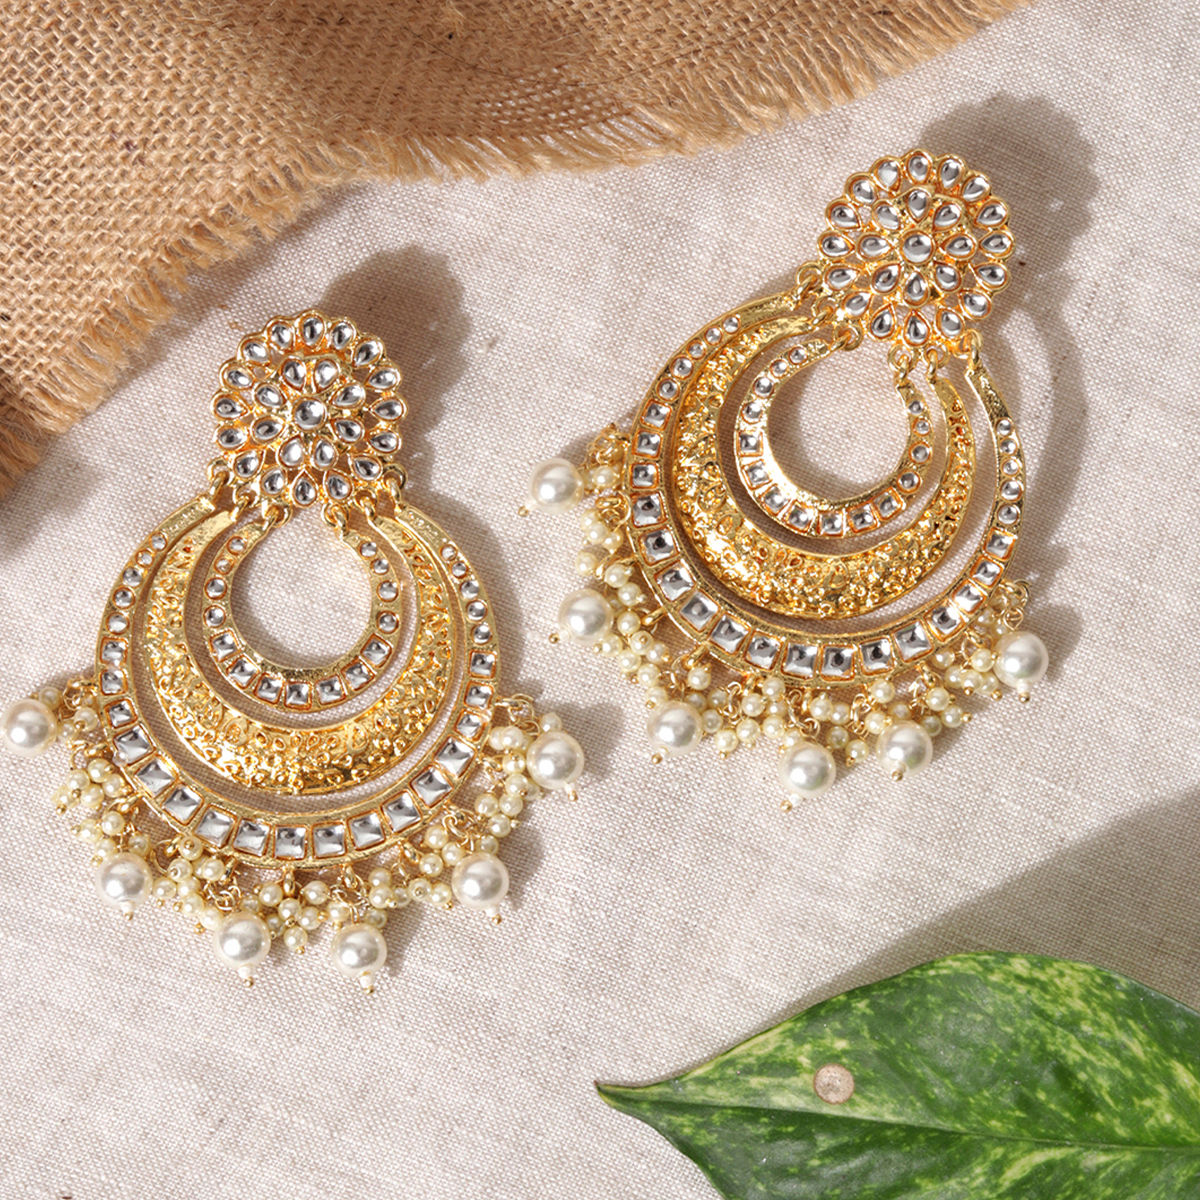 Details more than 76 traditional gold earrings super hot